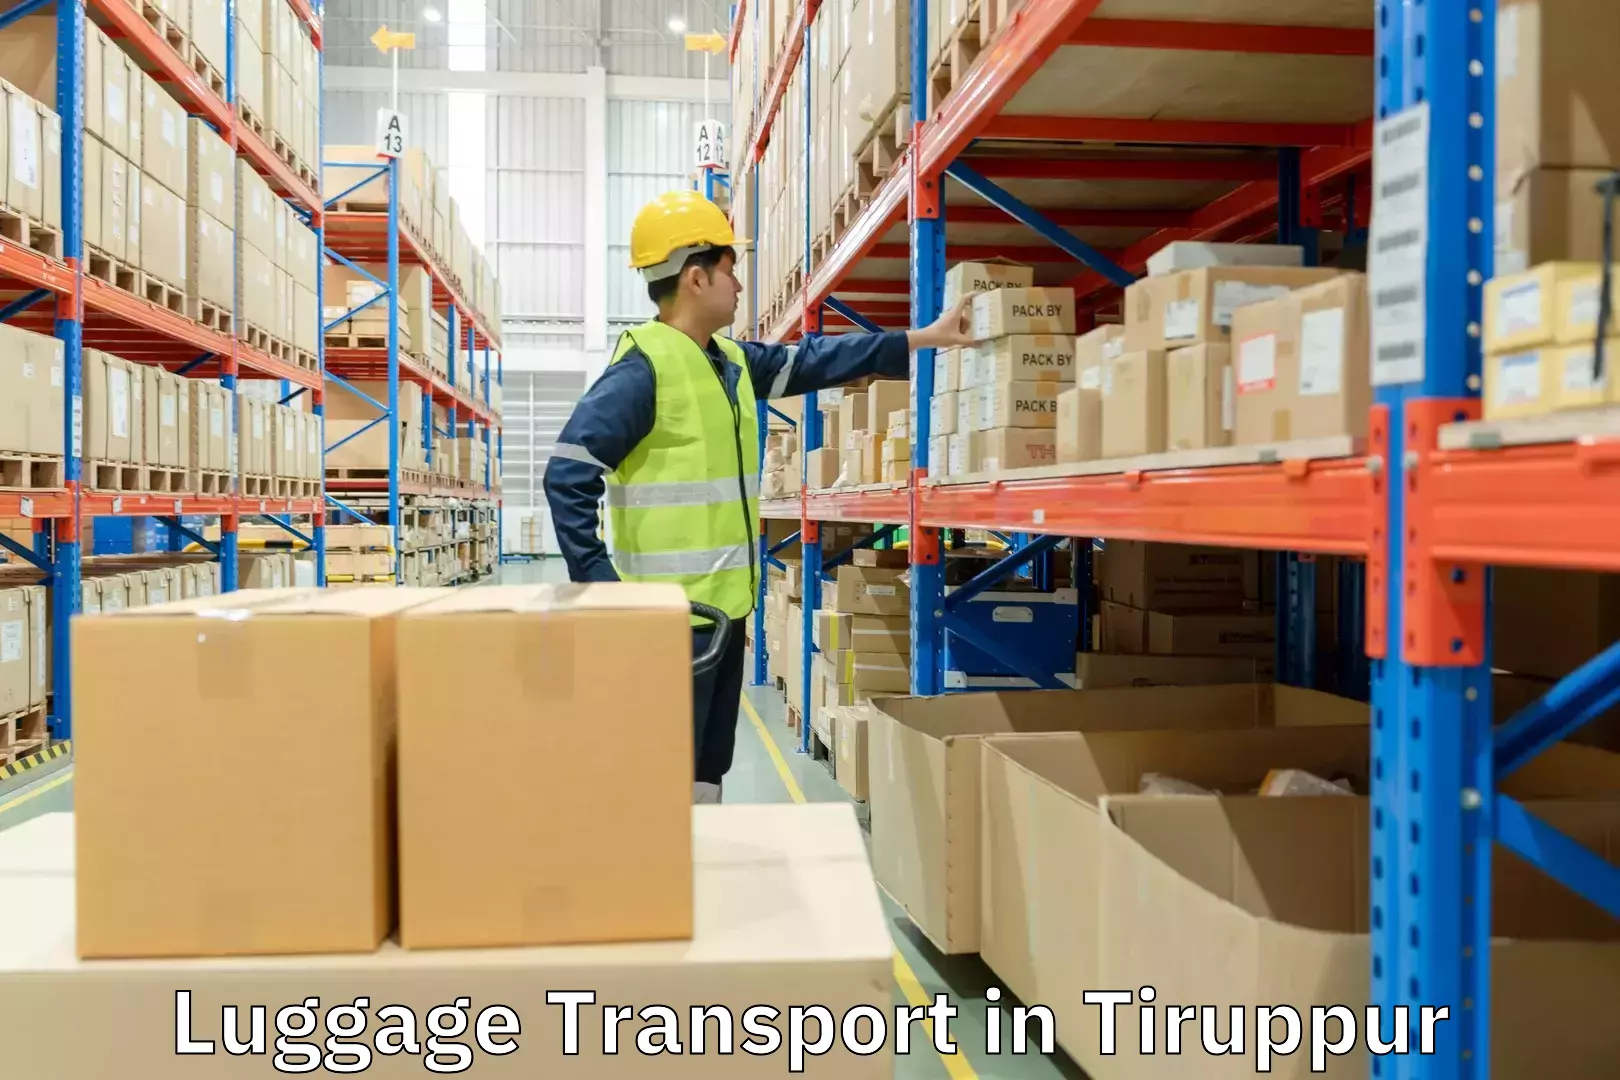 Luggage shipment tracking in Tiruppur